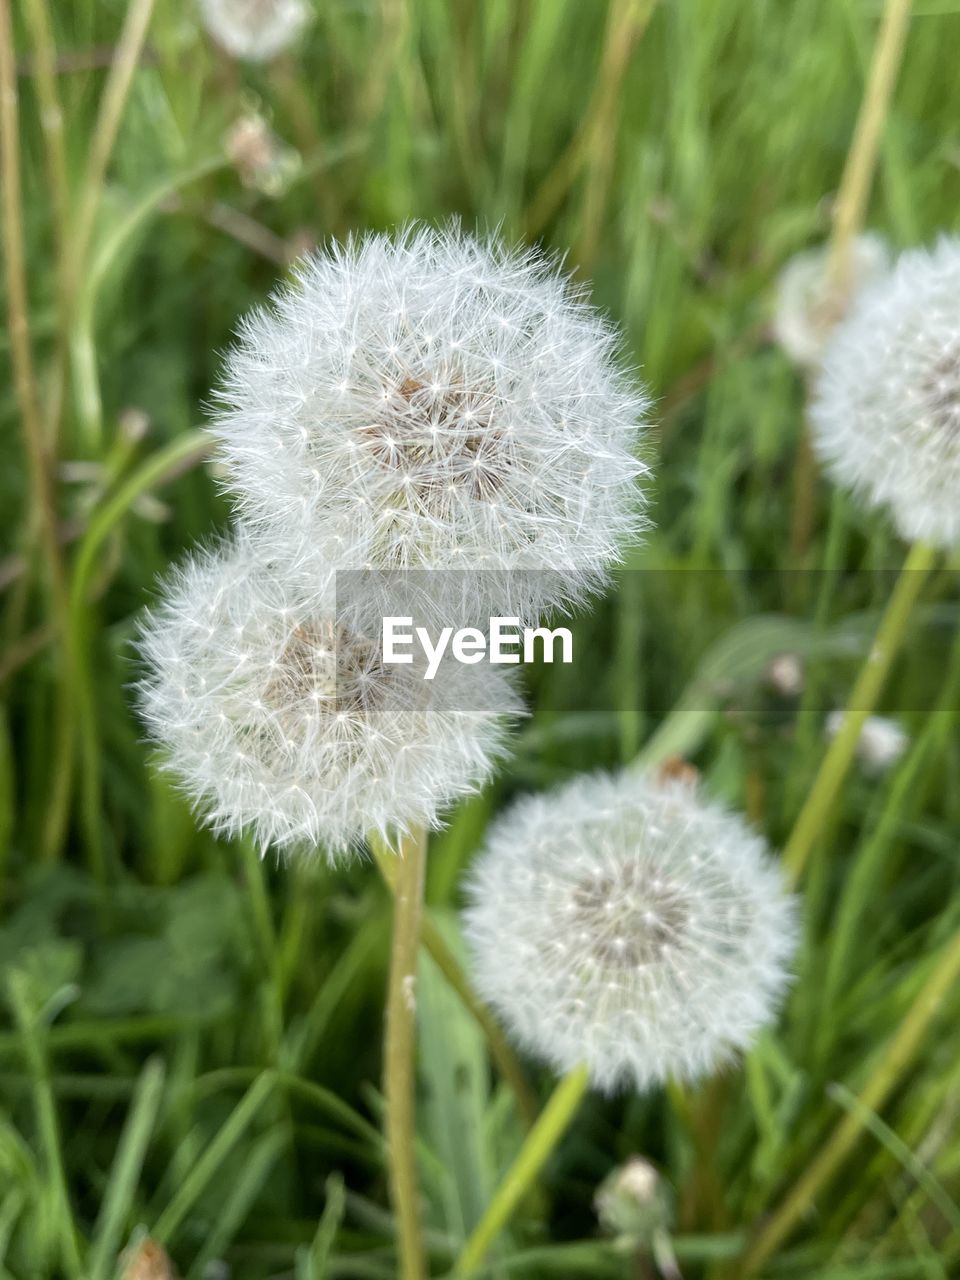 plant, flower, flowering plant, freshness, dandelion, beauty in nature, fragility, close-up, nature, growth, no people, focus on foreground, white, inflorescence, day, flower head, grass, wildflower, land, outdoors, softness, meadow, green, field, plant stem, tranquility